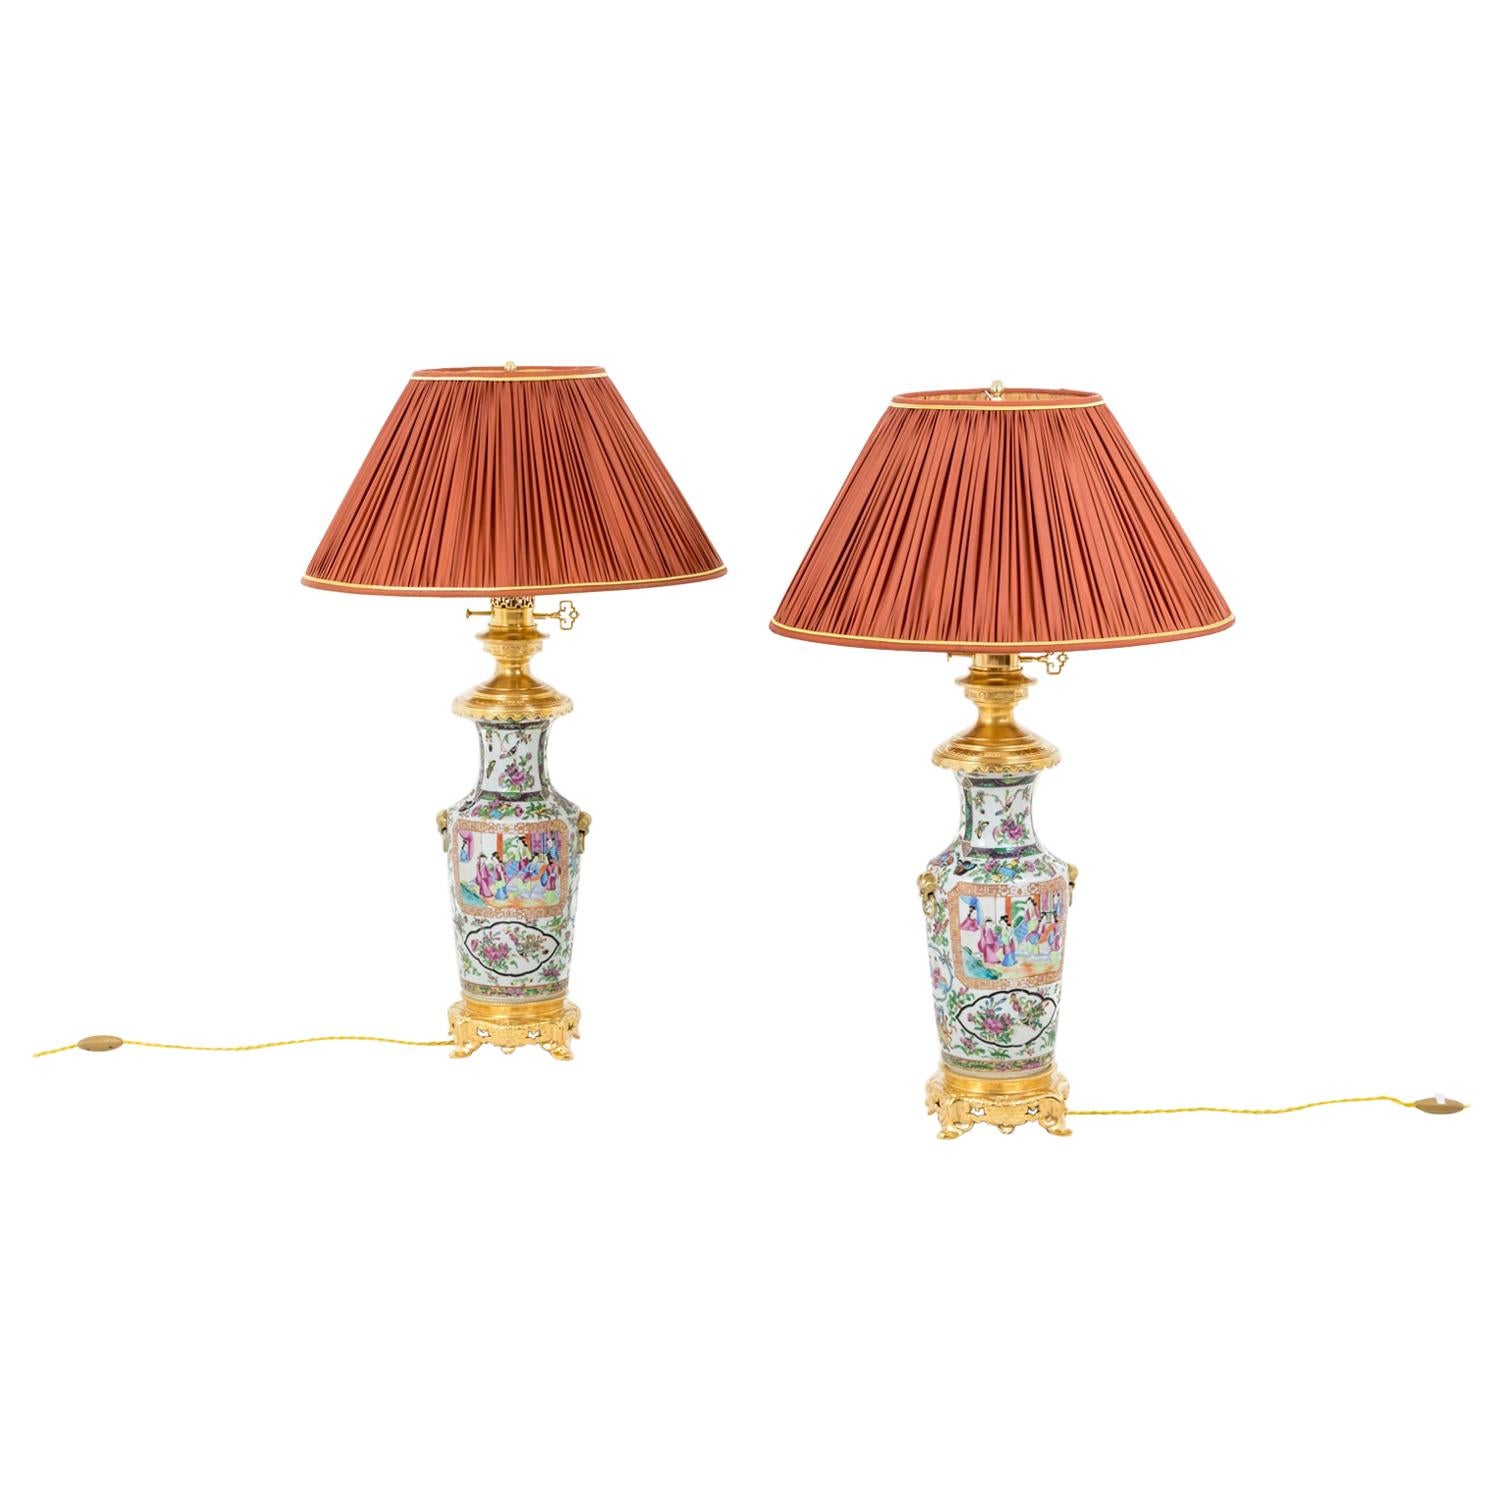 Pair of Lamps in Samson Porcelain and Gilt Bronze, circa 1880